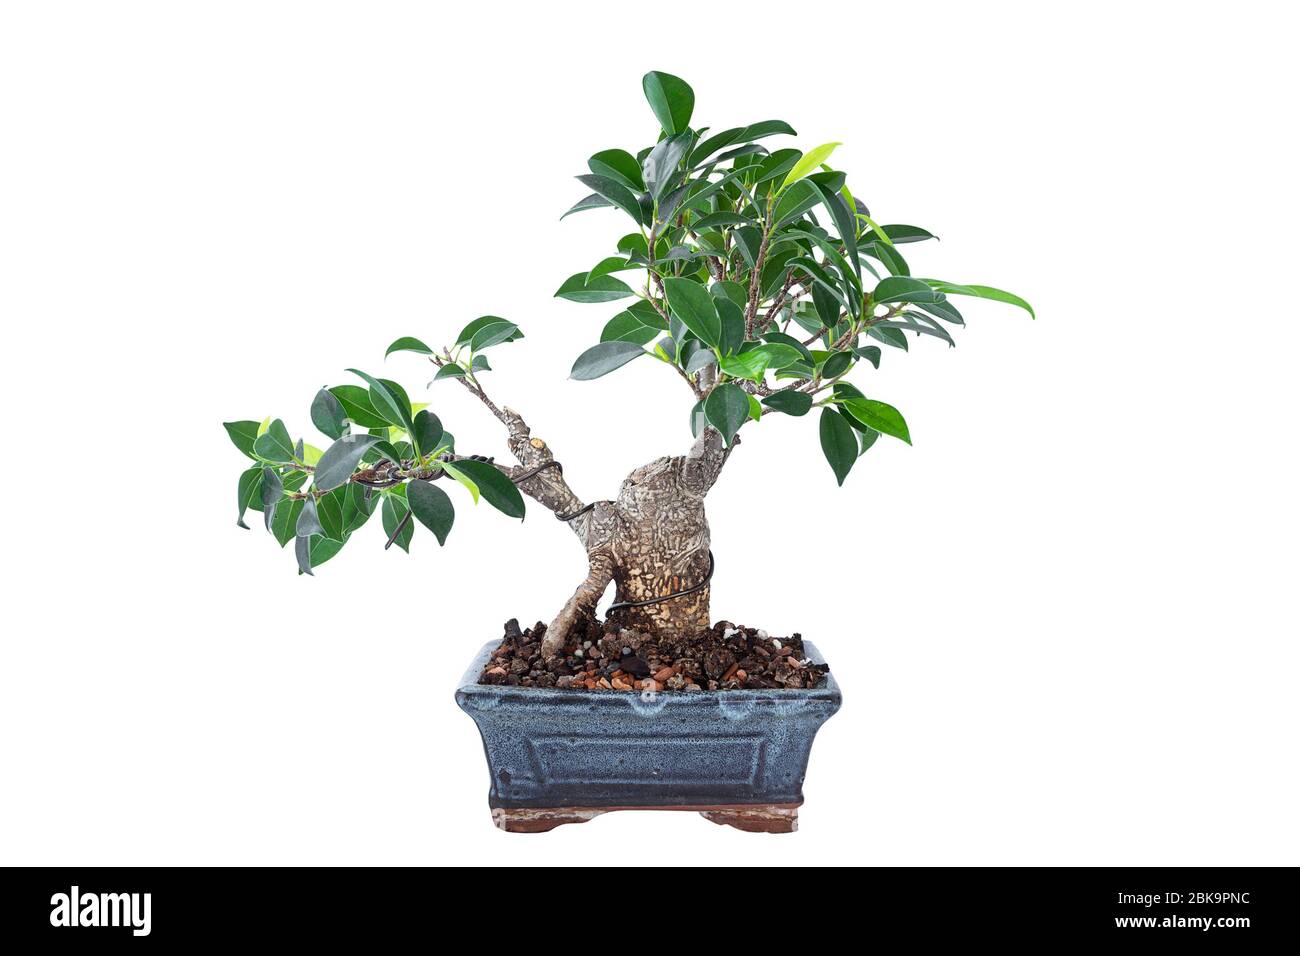 Ficus microcarpa tigerbark bonsai in training, plant isolated over white background Stock Photo